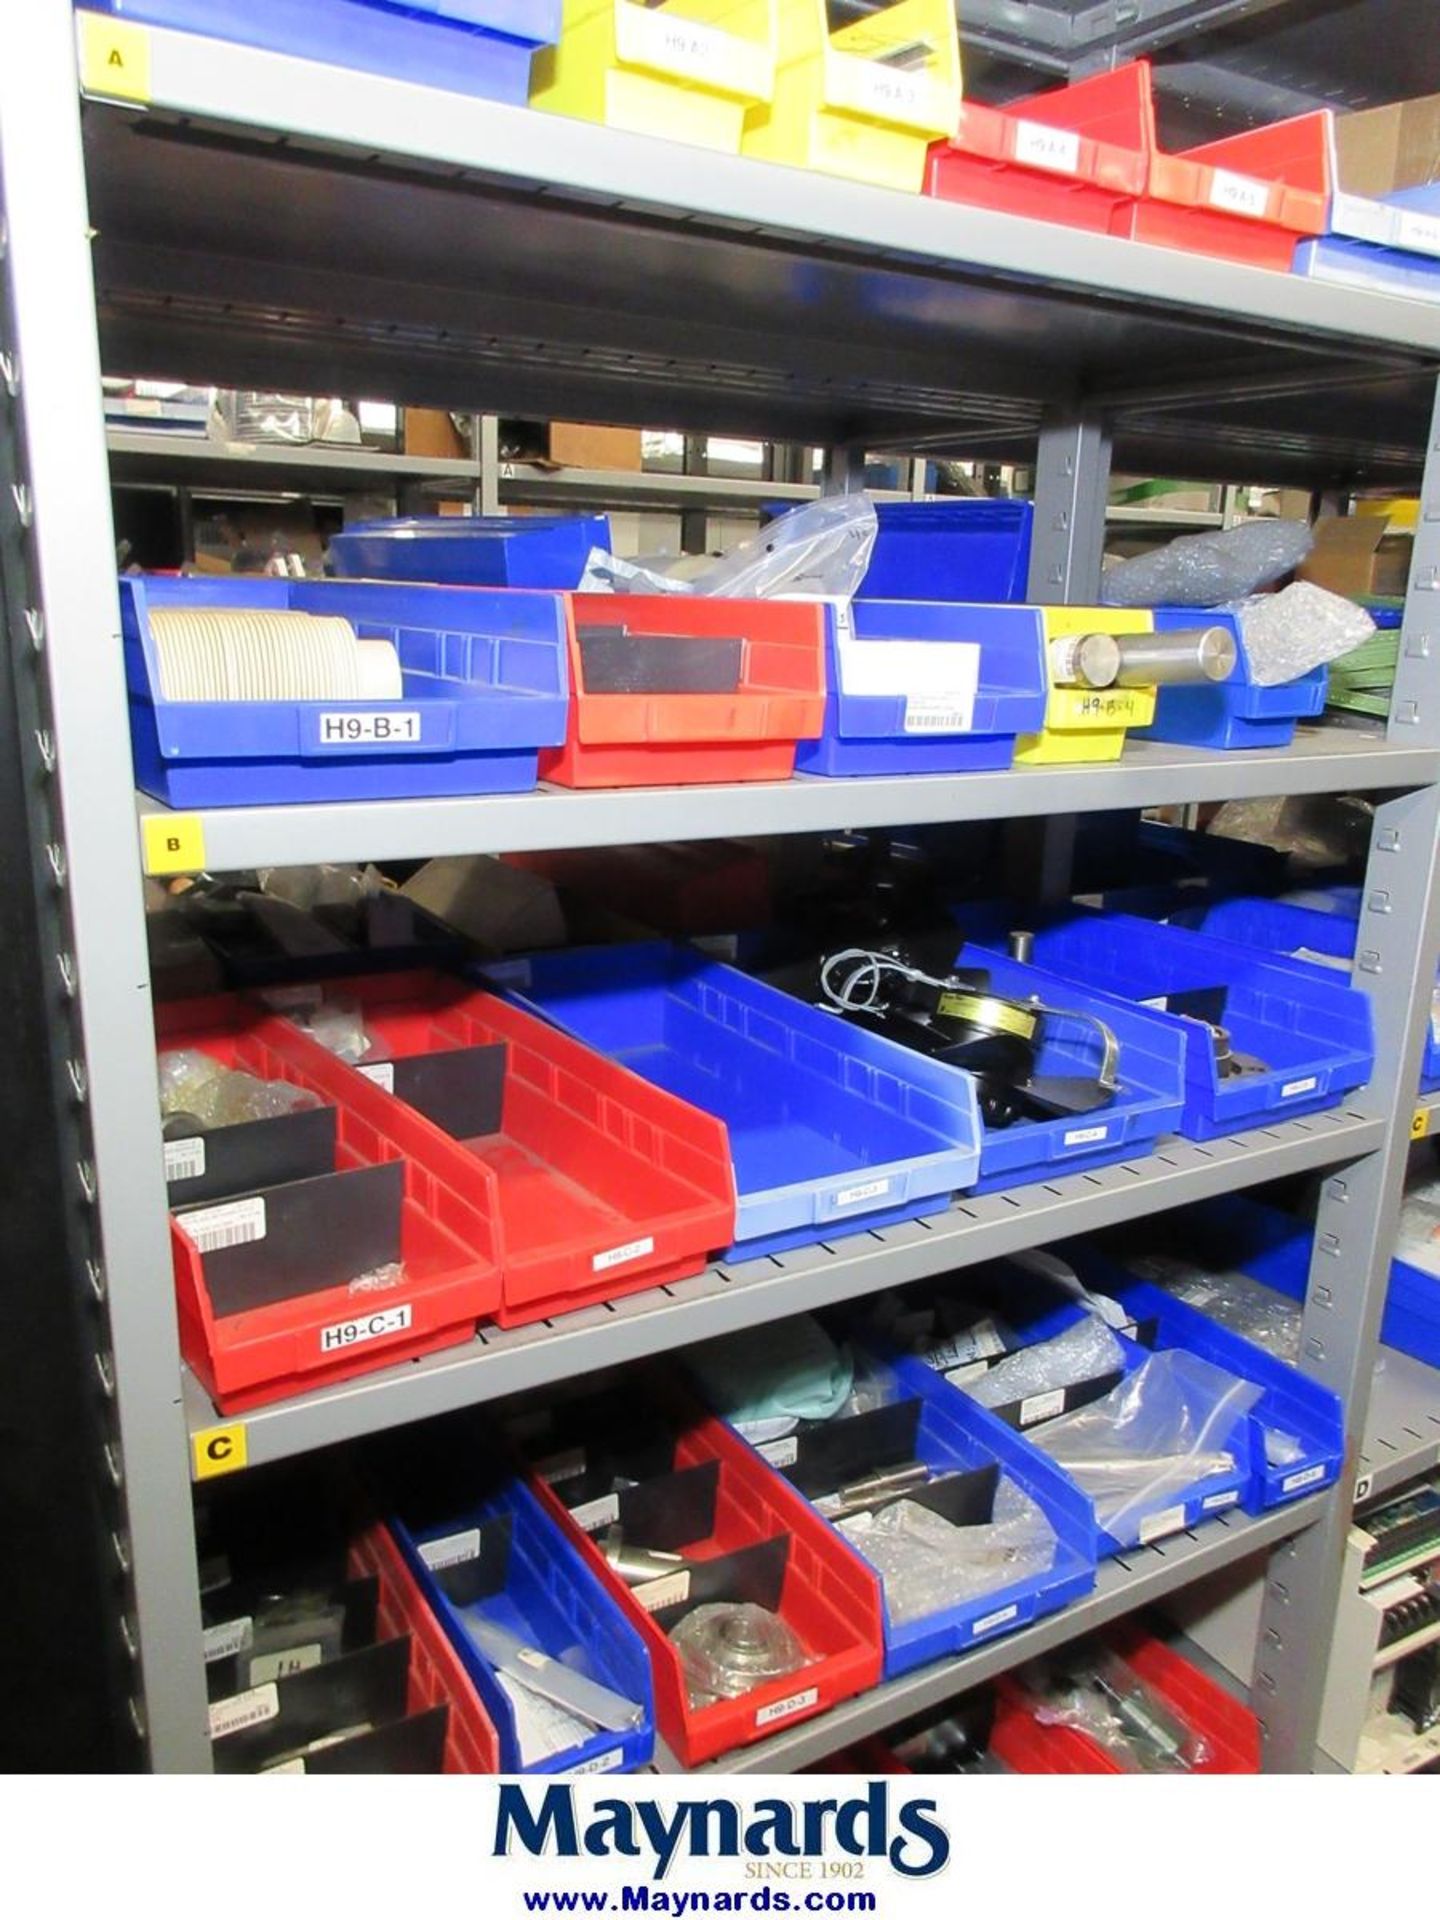 Large Lot of Electrical Controls, PLC's, Drives & Remaining Contents of Maint. Parts Crib - Image 48 of 107